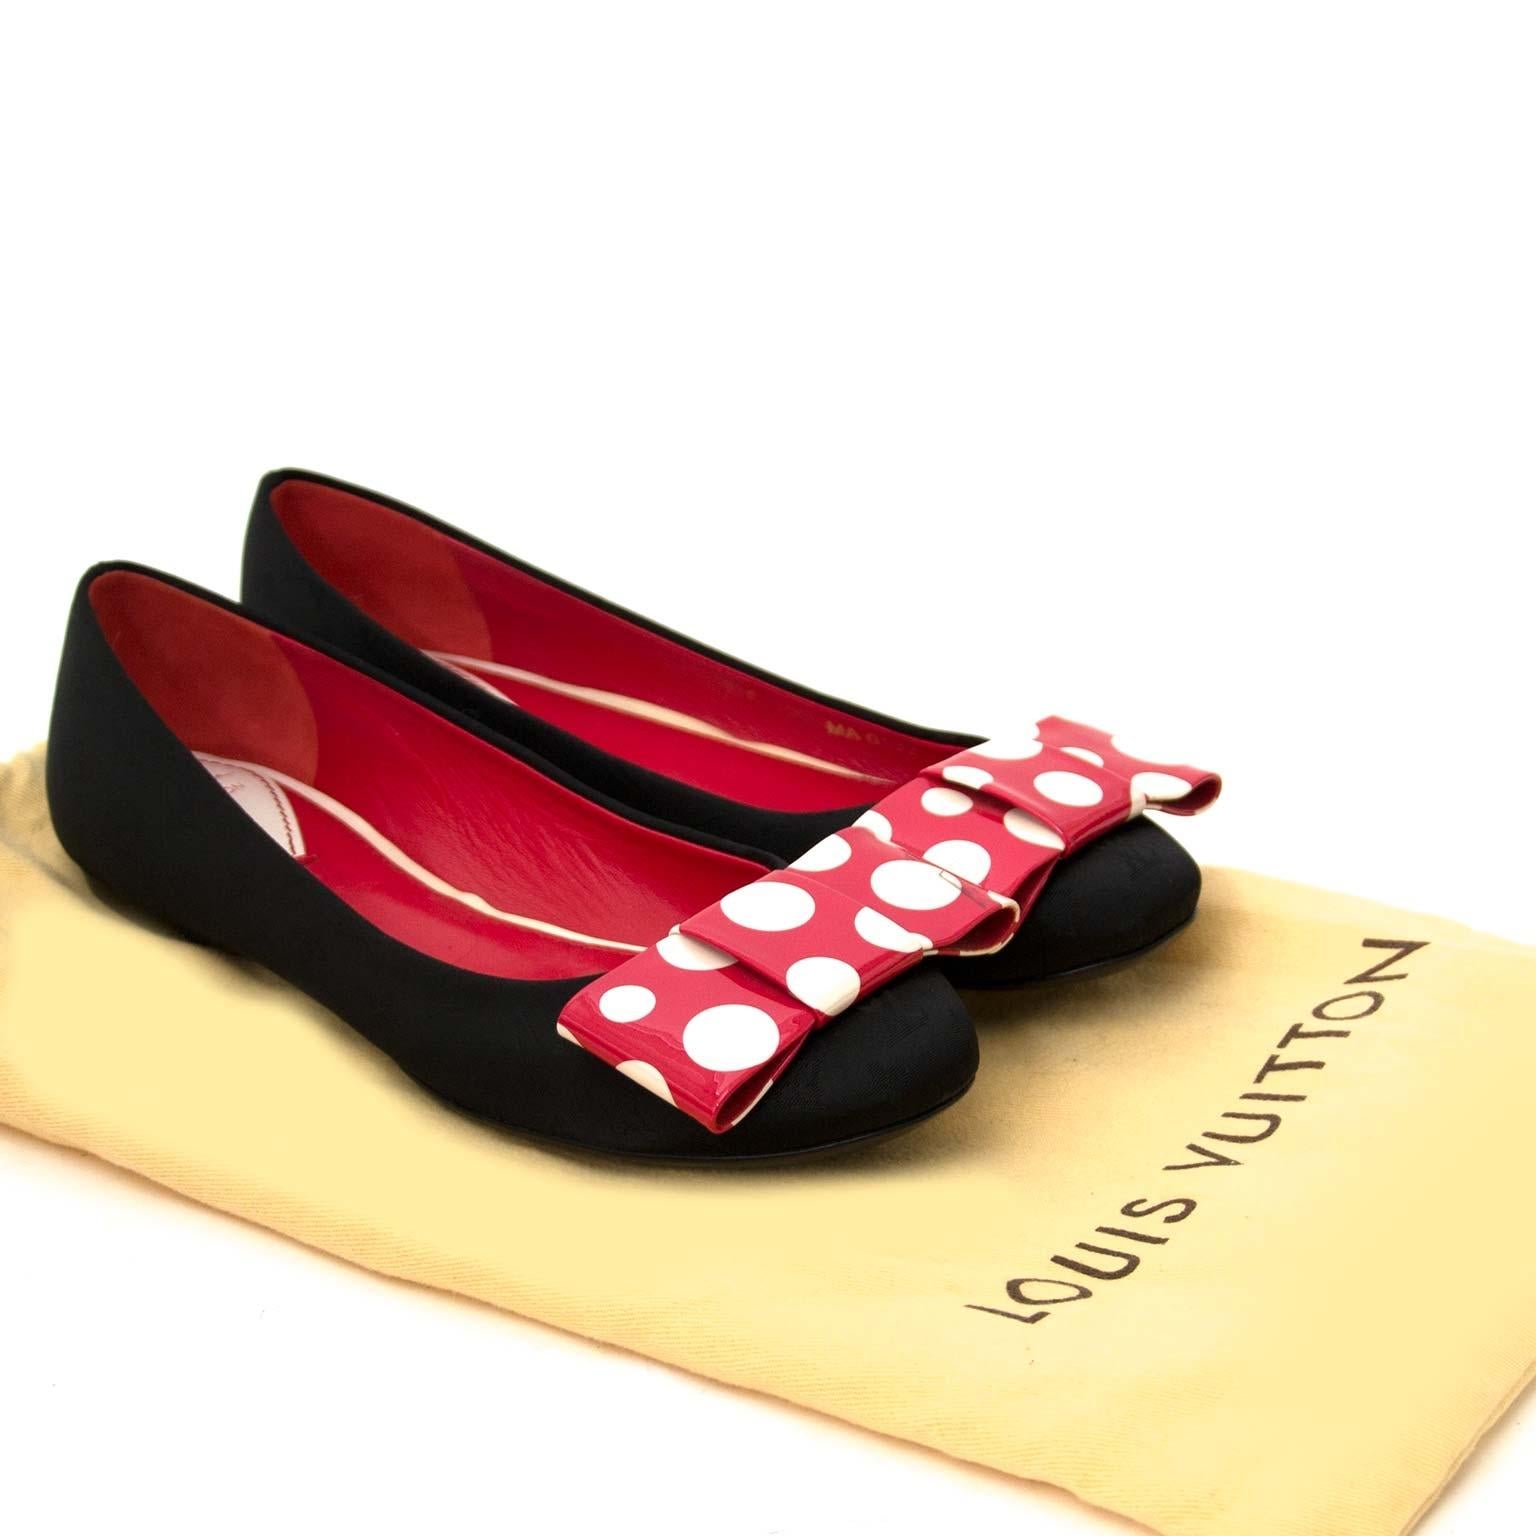 Brand New!

Louis Vuitton X Yayoi Kusama Monogram Dots Ballerinas

The collection by Louis Vuitton and Yayoi Kusama is bold, playful and not for the faint-hearted. This range is one of the most significant collaborations Louis Vuitton ever did.